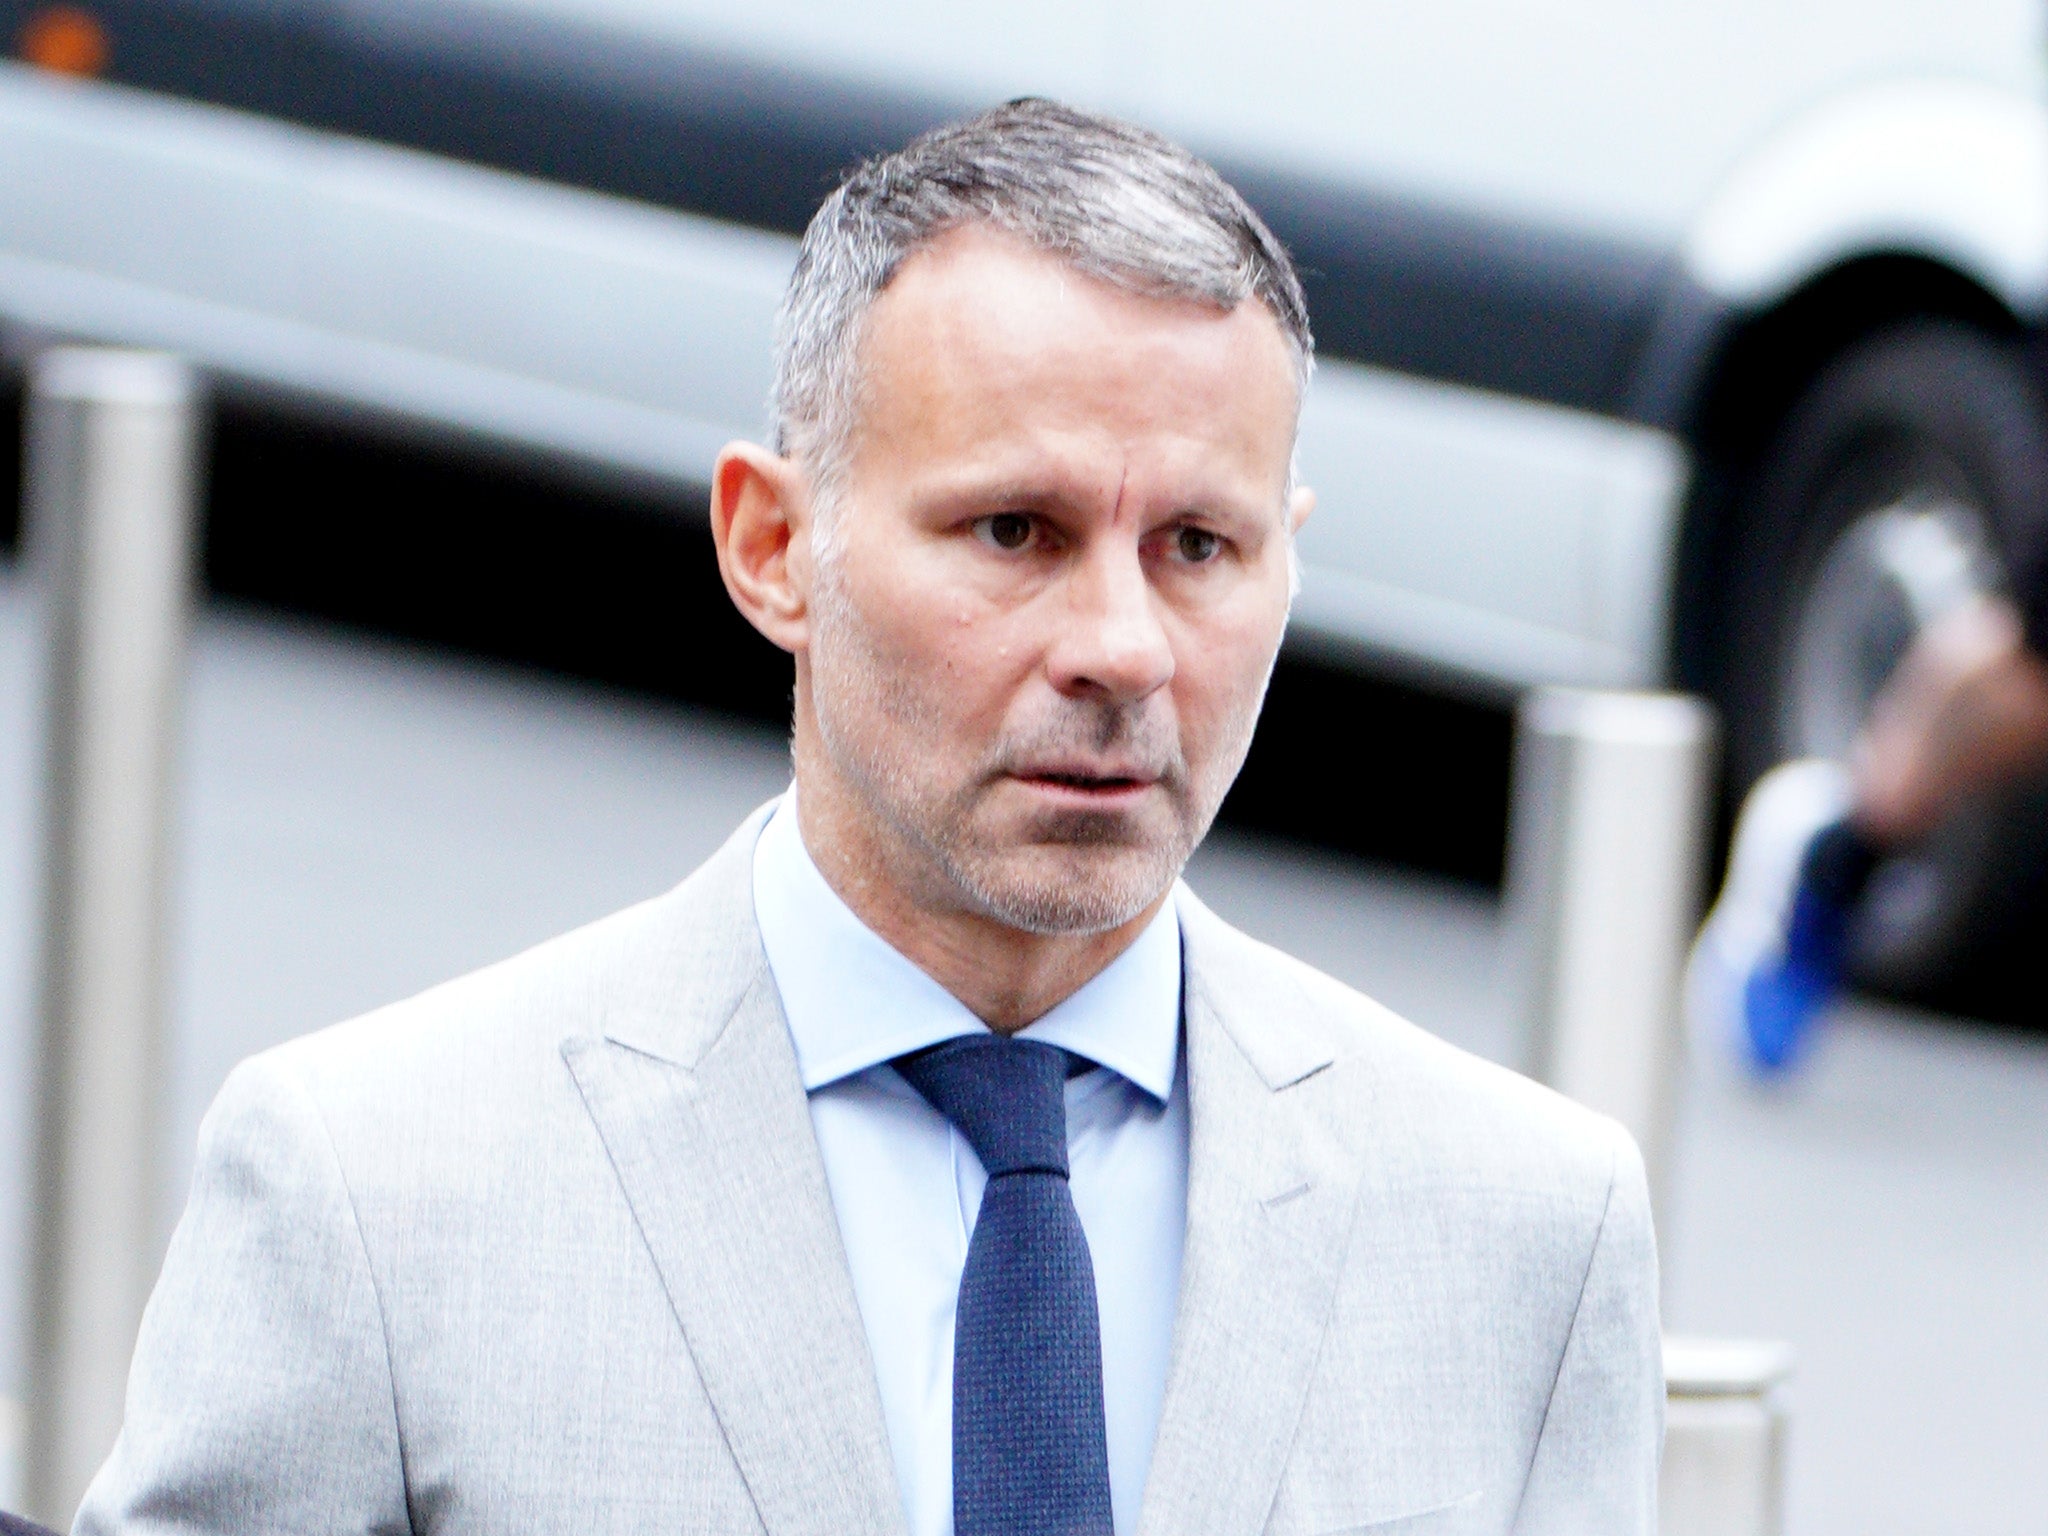 Former Manchester United footballer Ryan Giggs is on trial at Manchester Crown Court (Peter Byrne/PA)